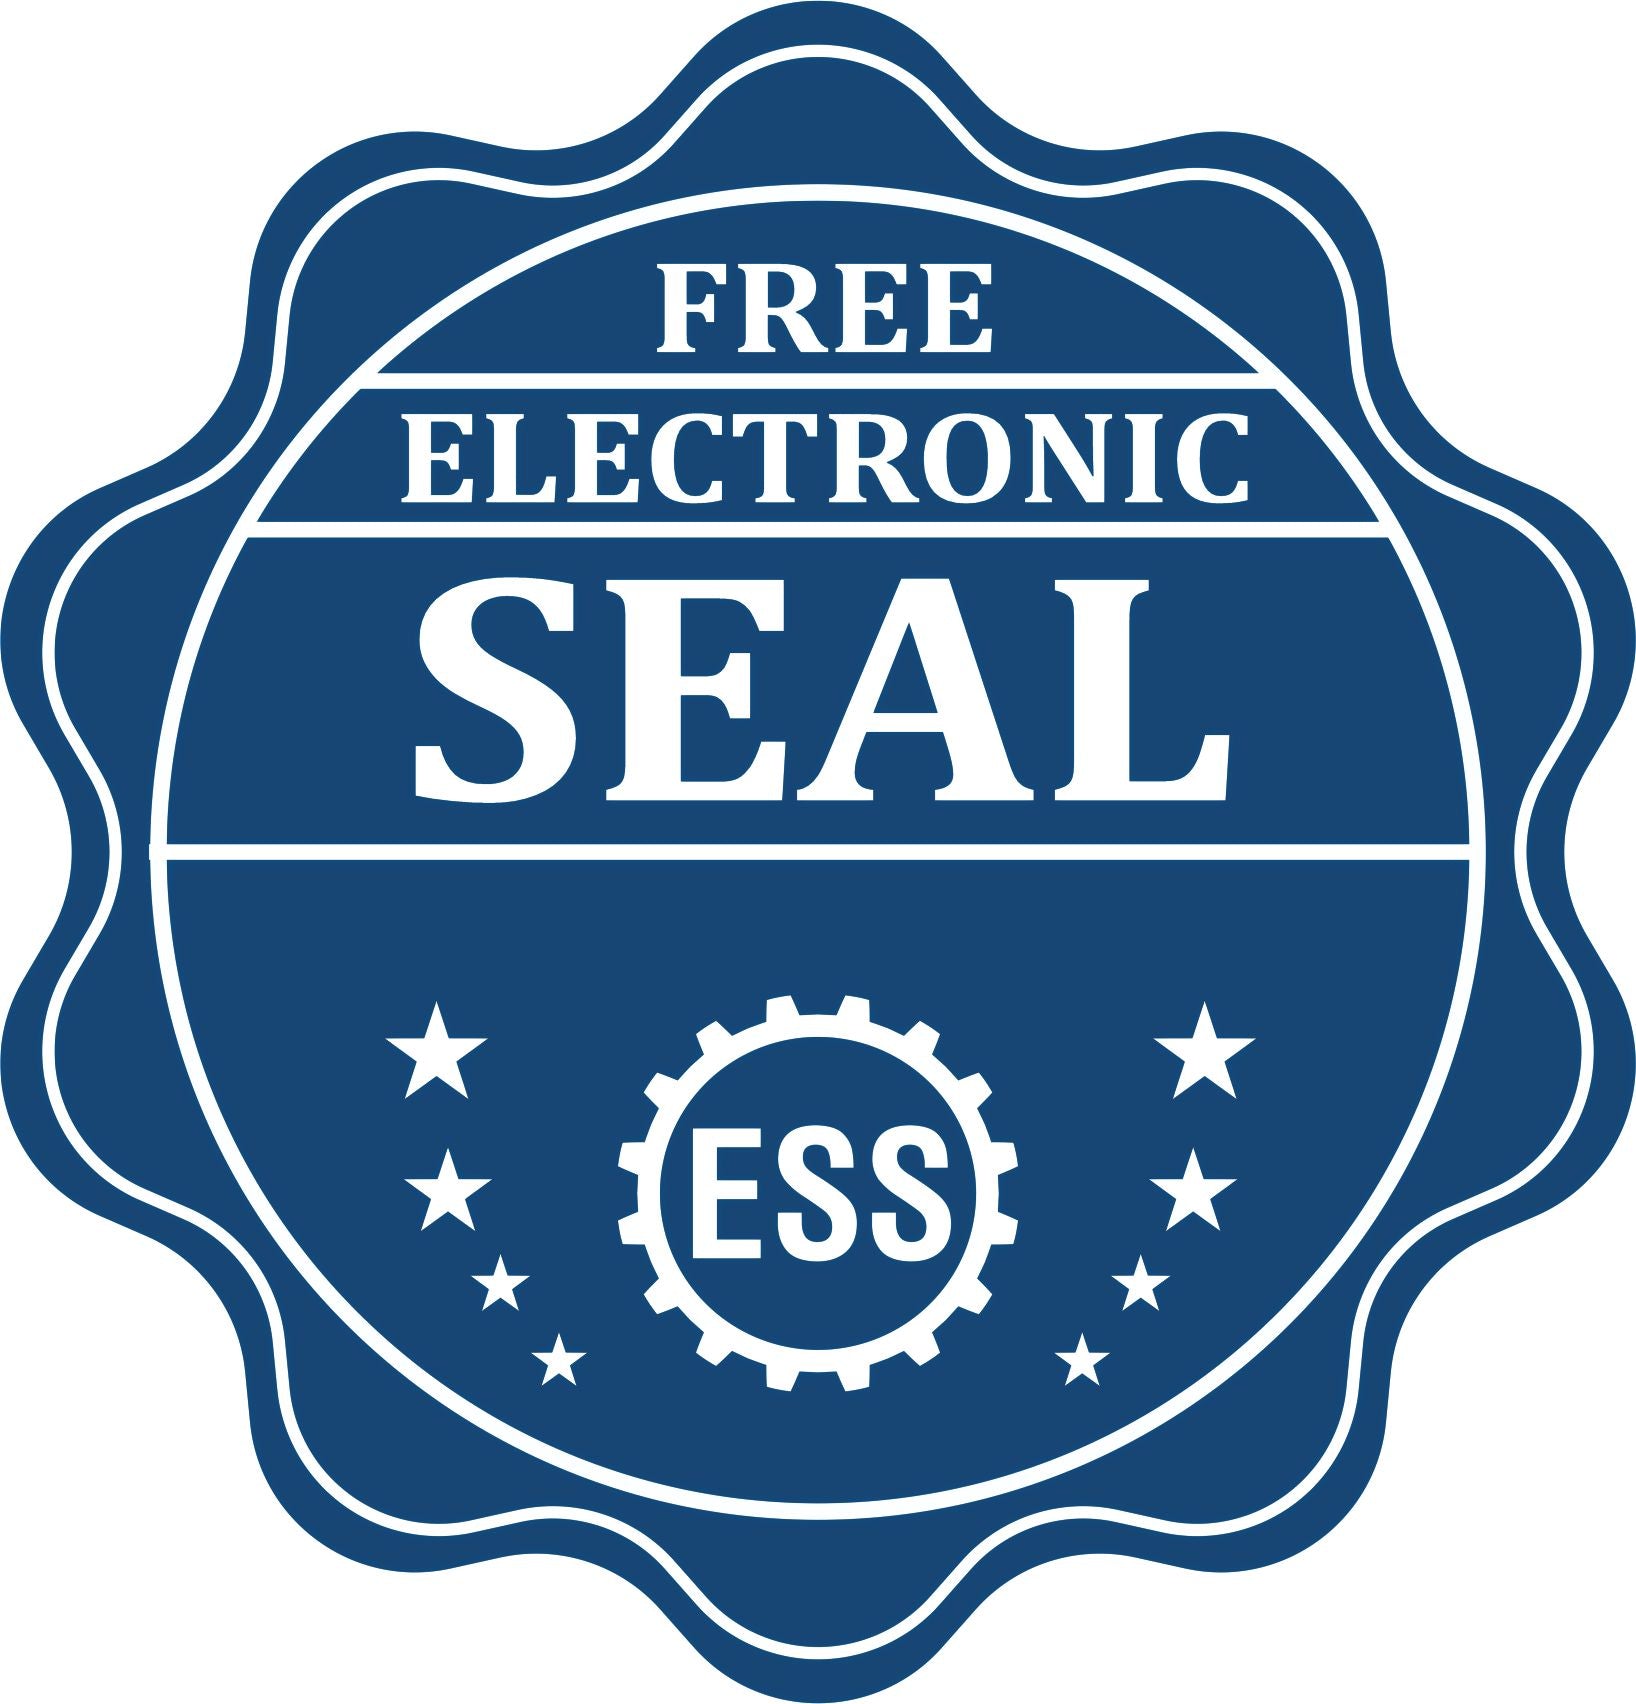 A badge showing a free electronic seal for the Premium MaxLight Pre-Inked Wyoming Engineering Stamp with stars and the ESS gear on the emblem.